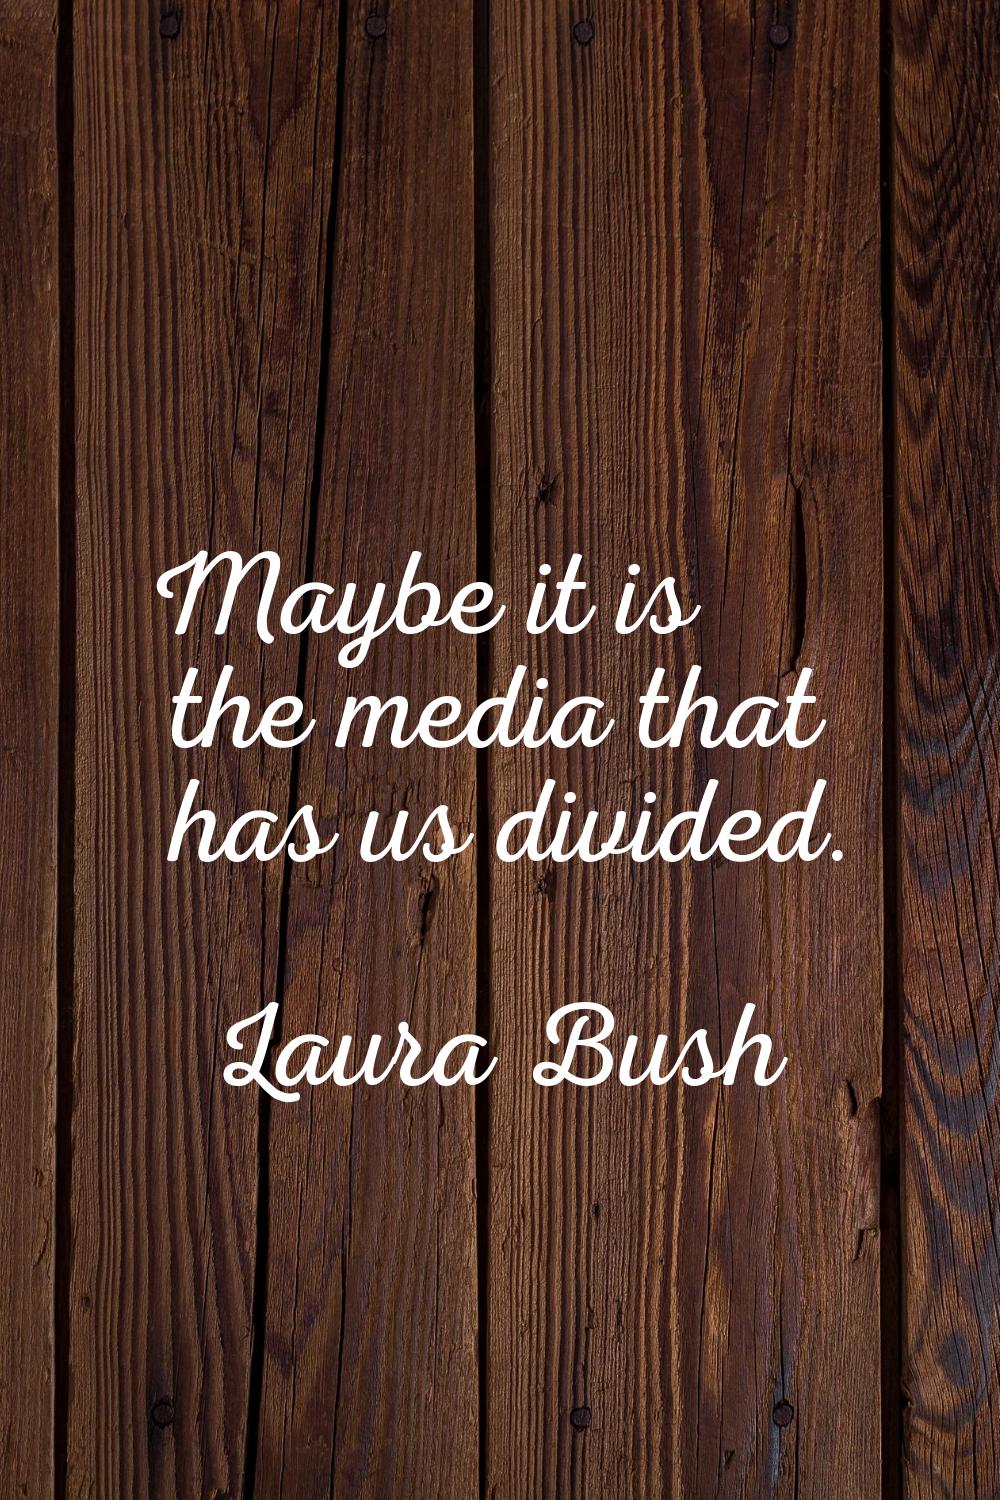 Maybe it is the media that has us divided.